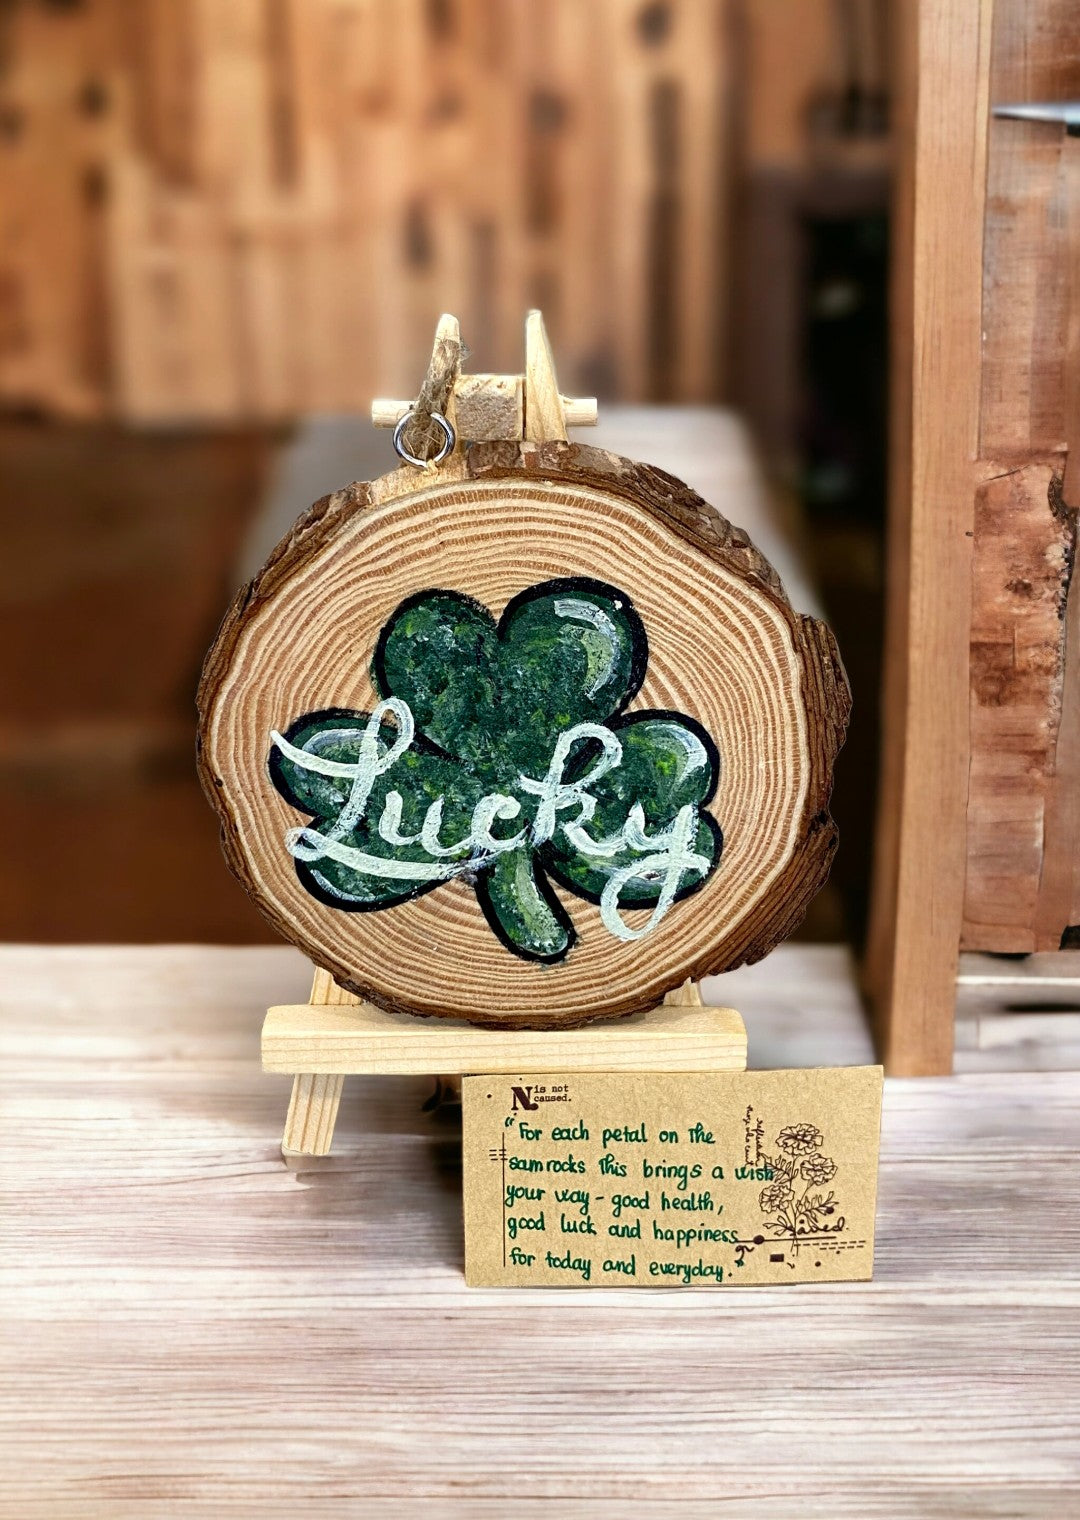 Emerald Blossoms - Lucky shamrock hand-painted on wood slice